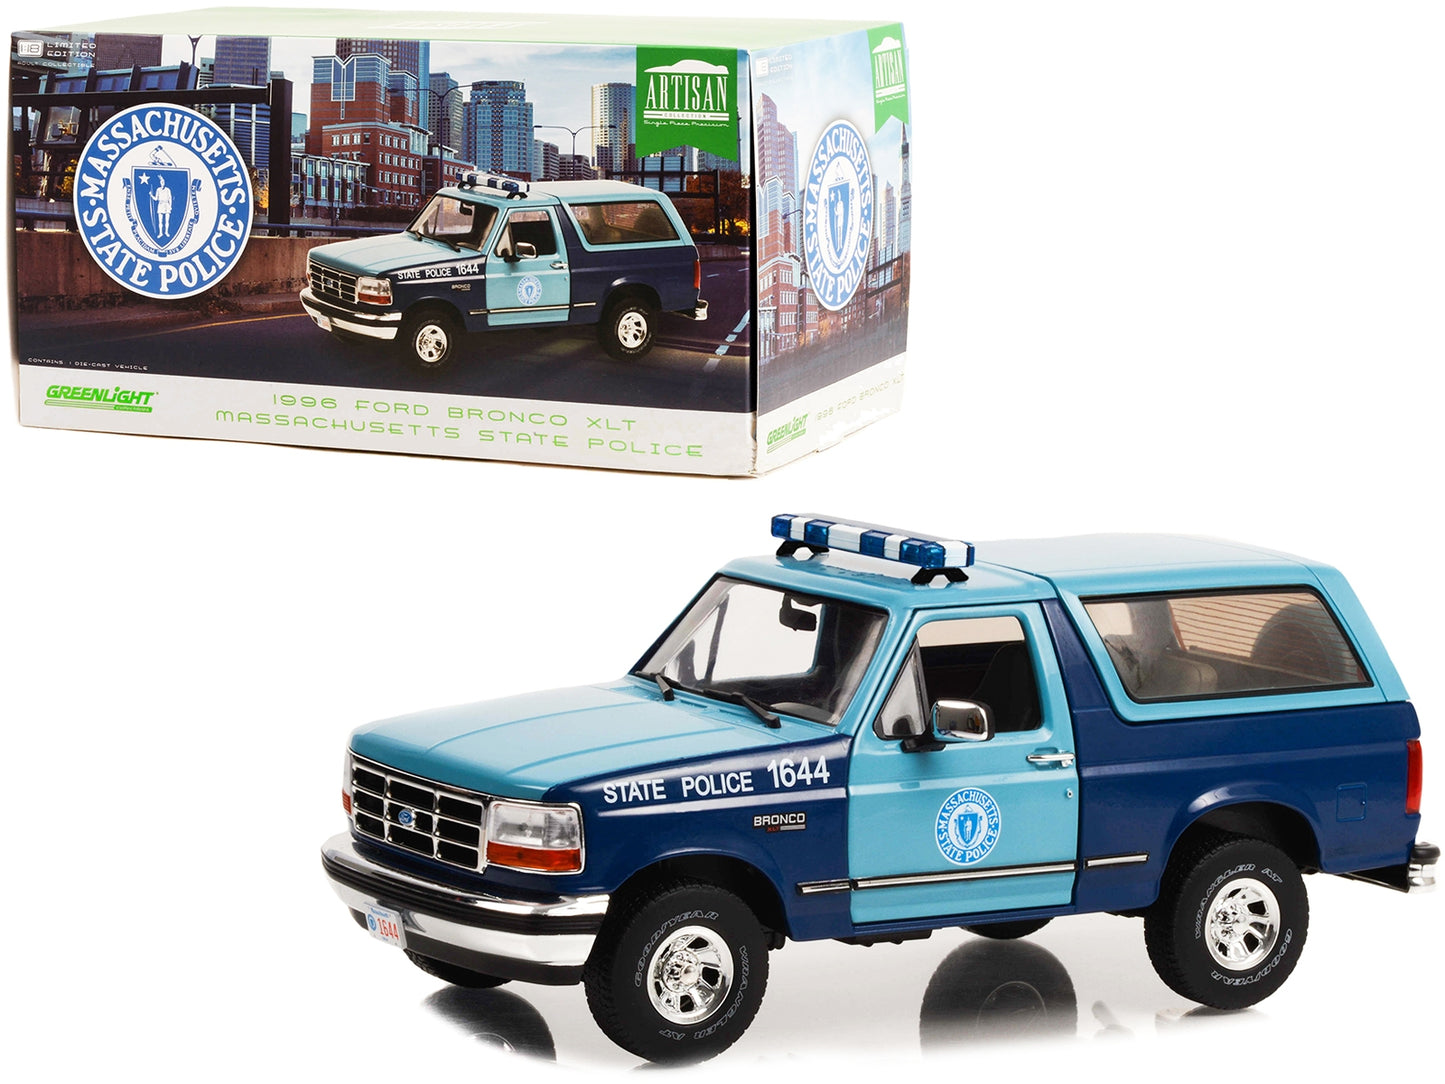 1996 Ford Bronco XLT Blue and Light Blue "Massachusetts State Police" "Artisan Collection" 1/18 Diecast Model Car by Greenlight